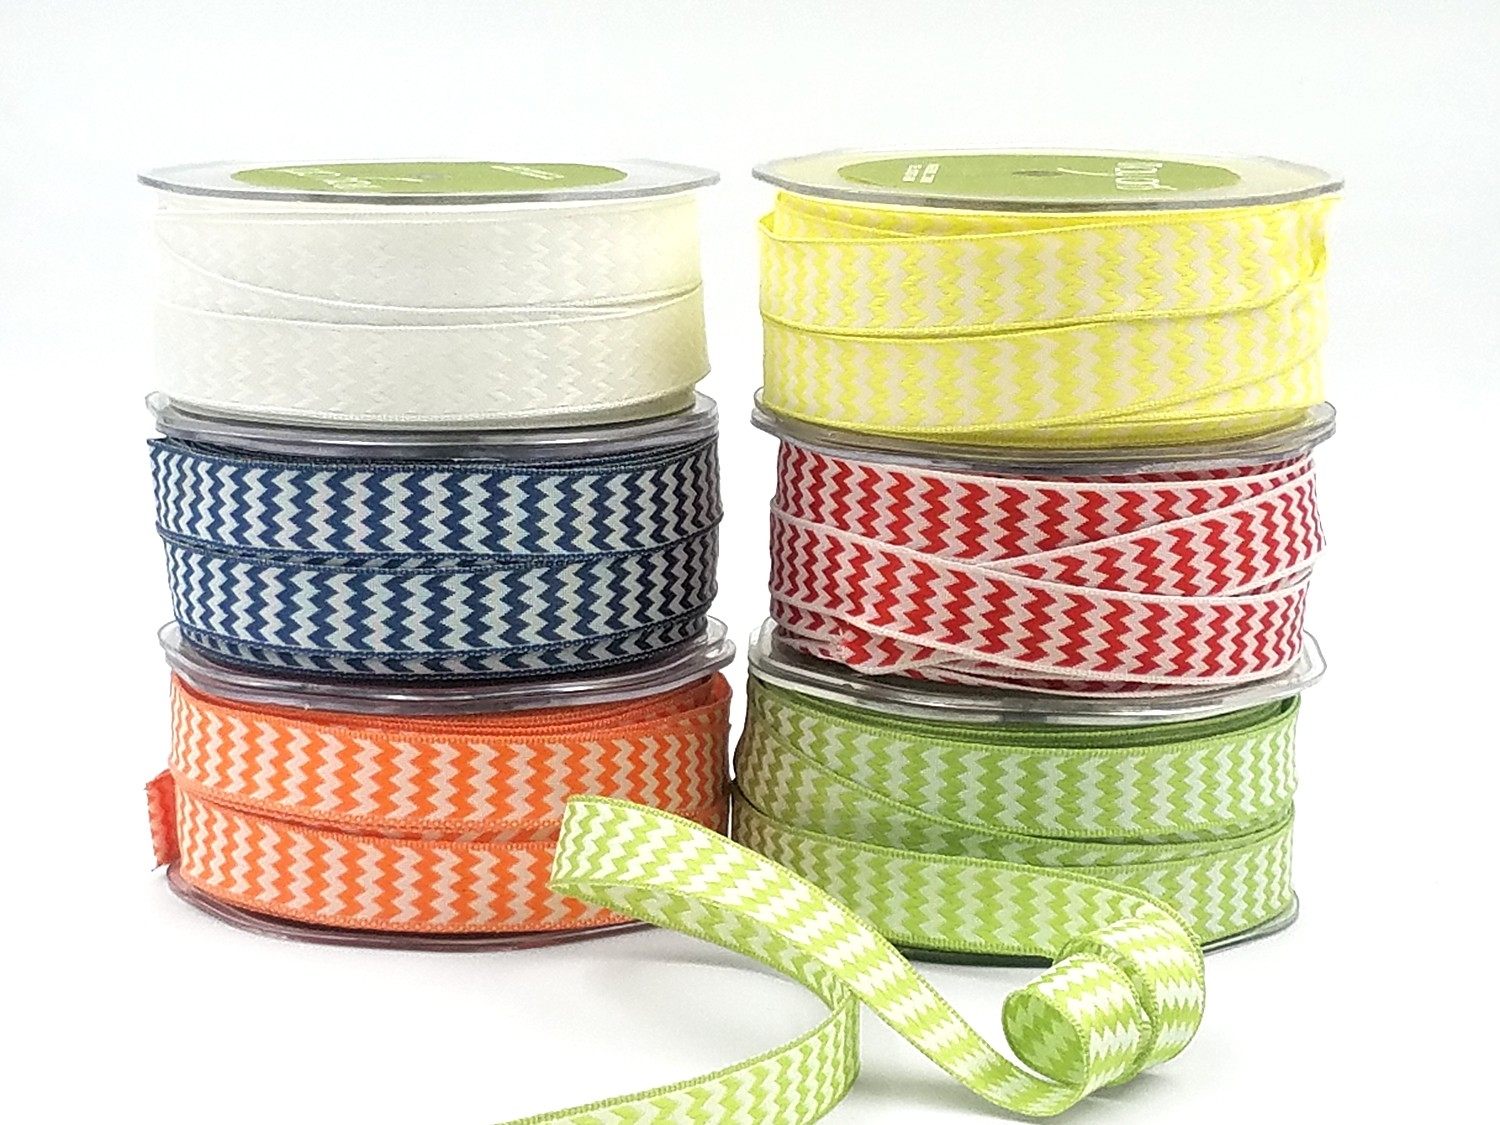 Woven Chevron Striped Ribbon with Wired Edge